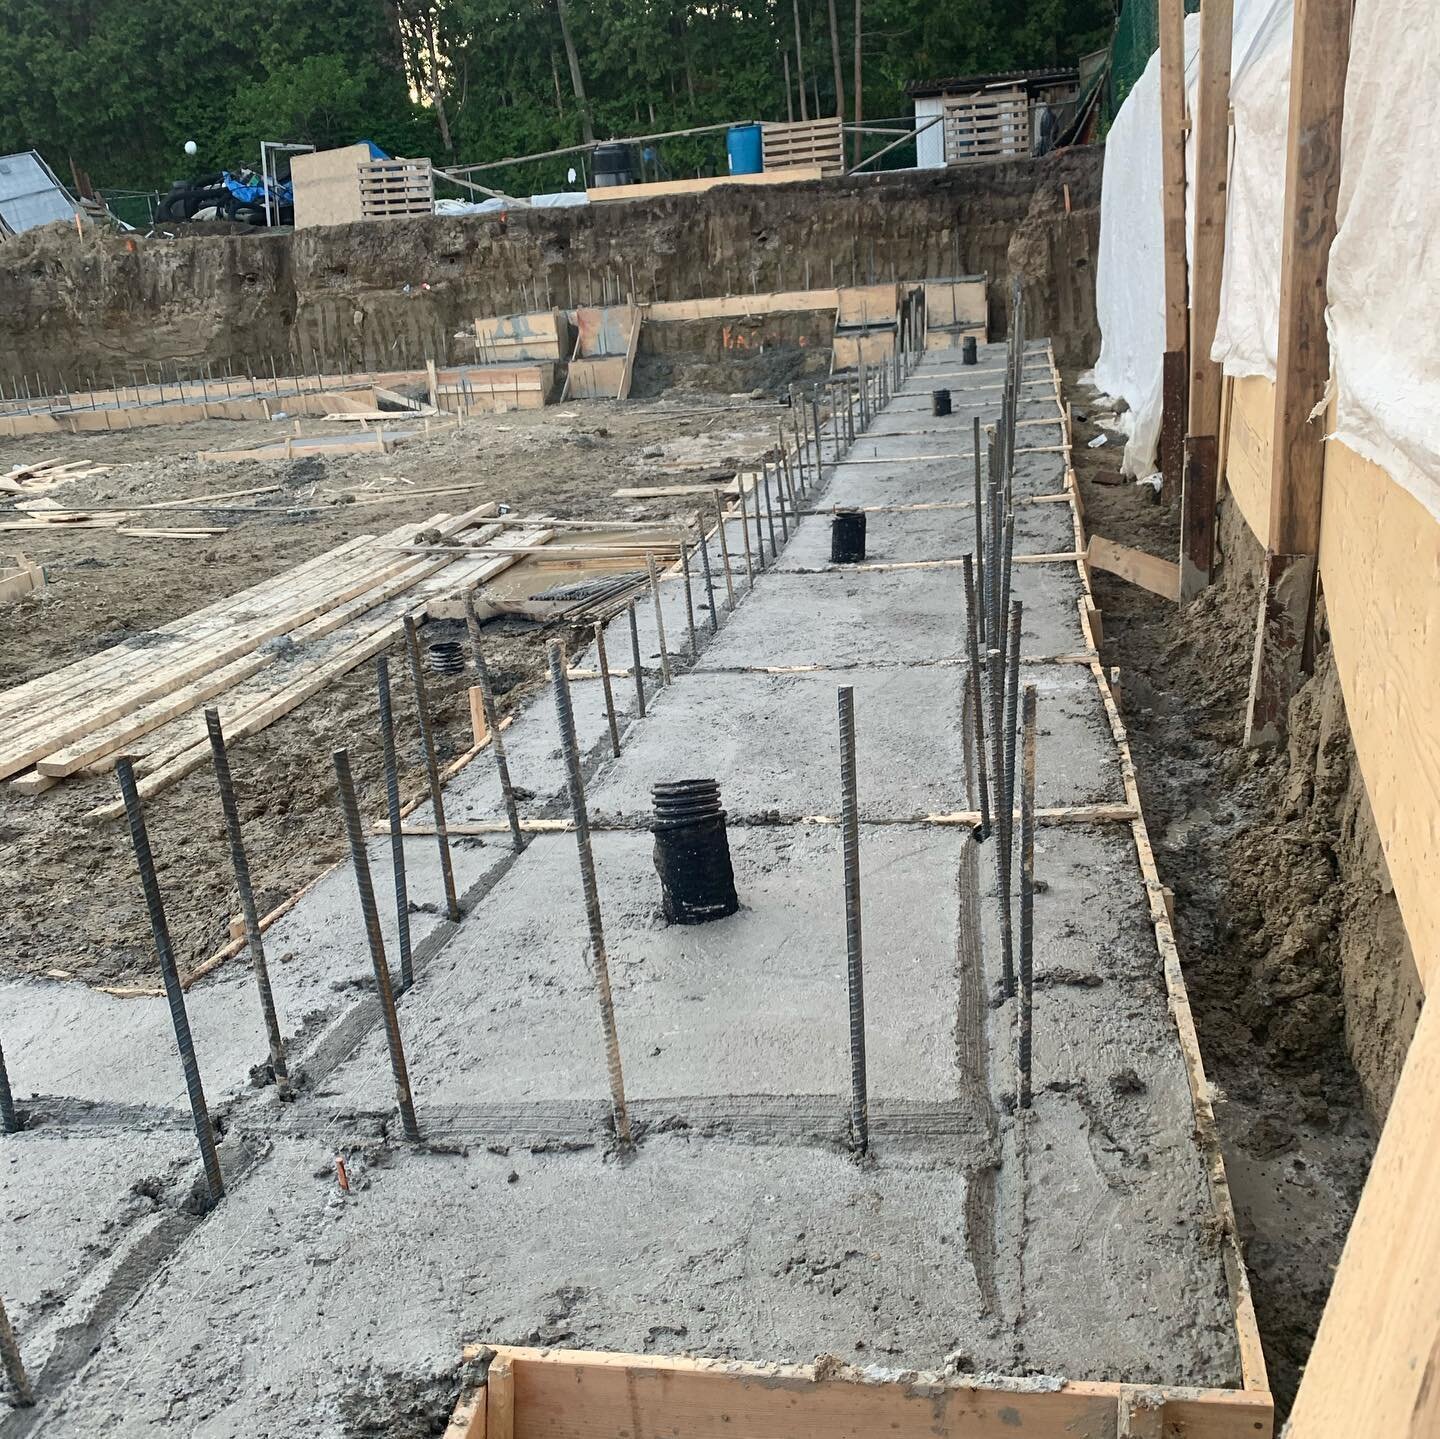 The smell of freshly poured footings 💪 It has been less than 48 hours since excavation was completed. Footings formed, re-bar placed, inspected by municipality and poured. Wall forming is next on deck. Crane is on route with forms this morning! 
#de